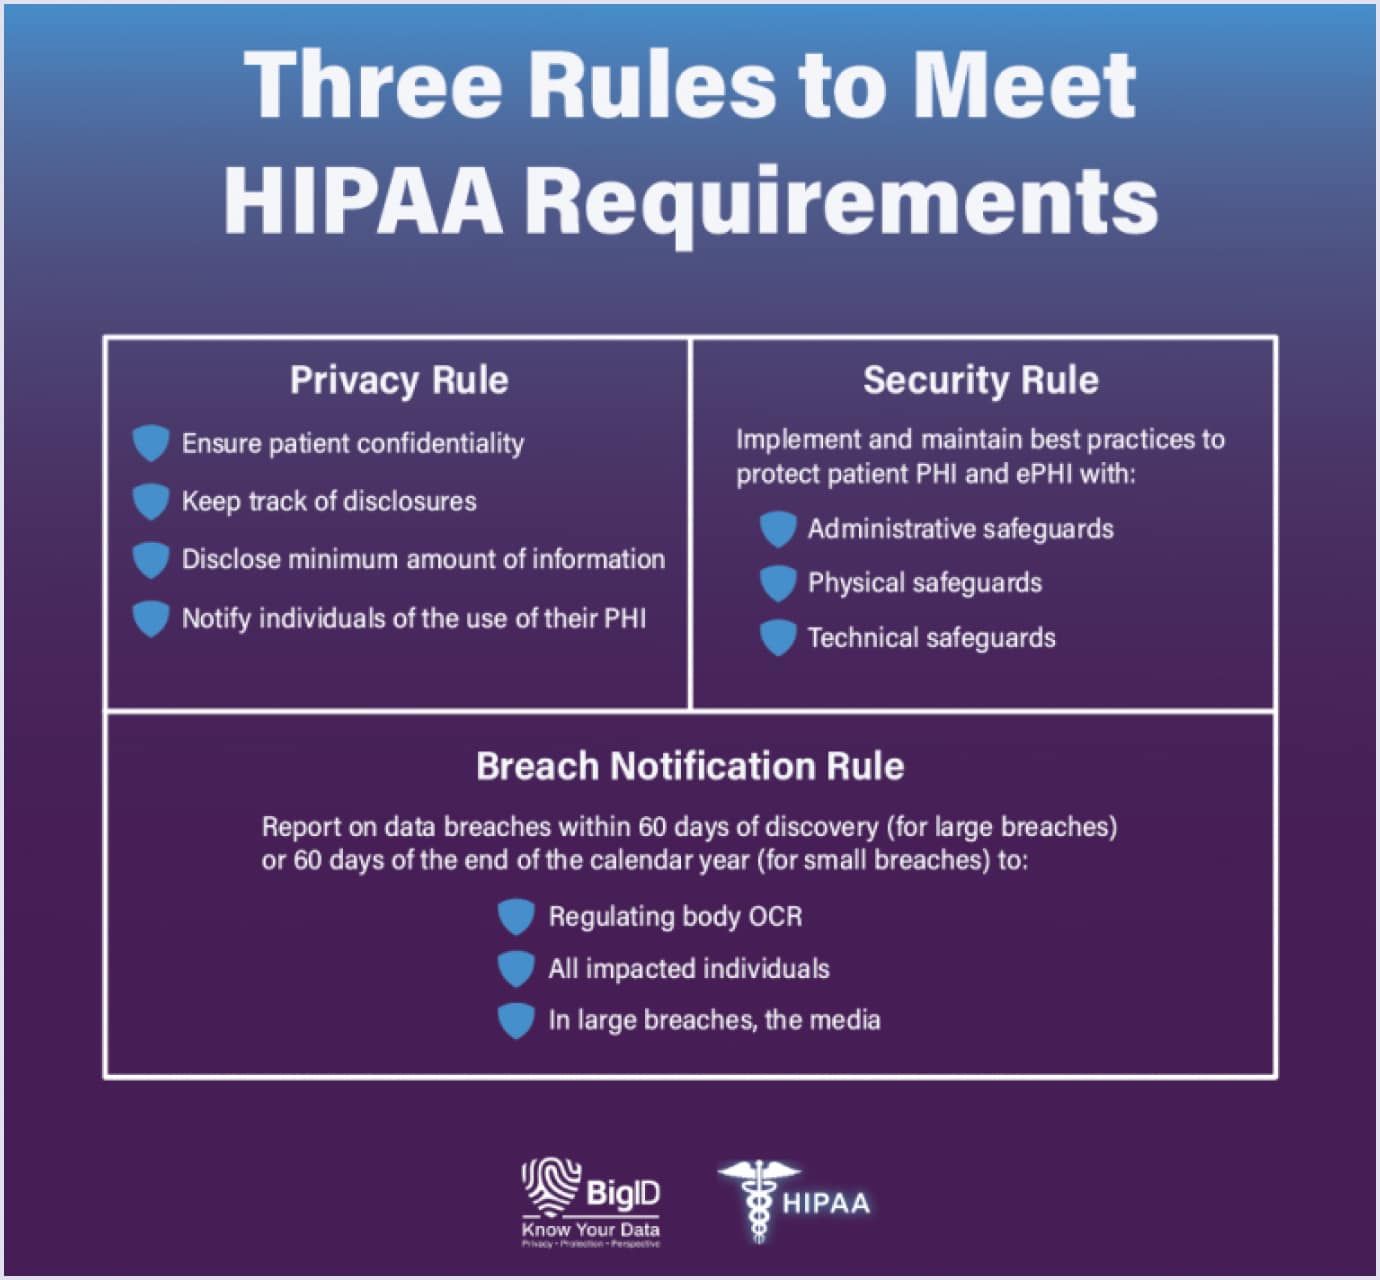 HIPAA requirements for healthcare apps